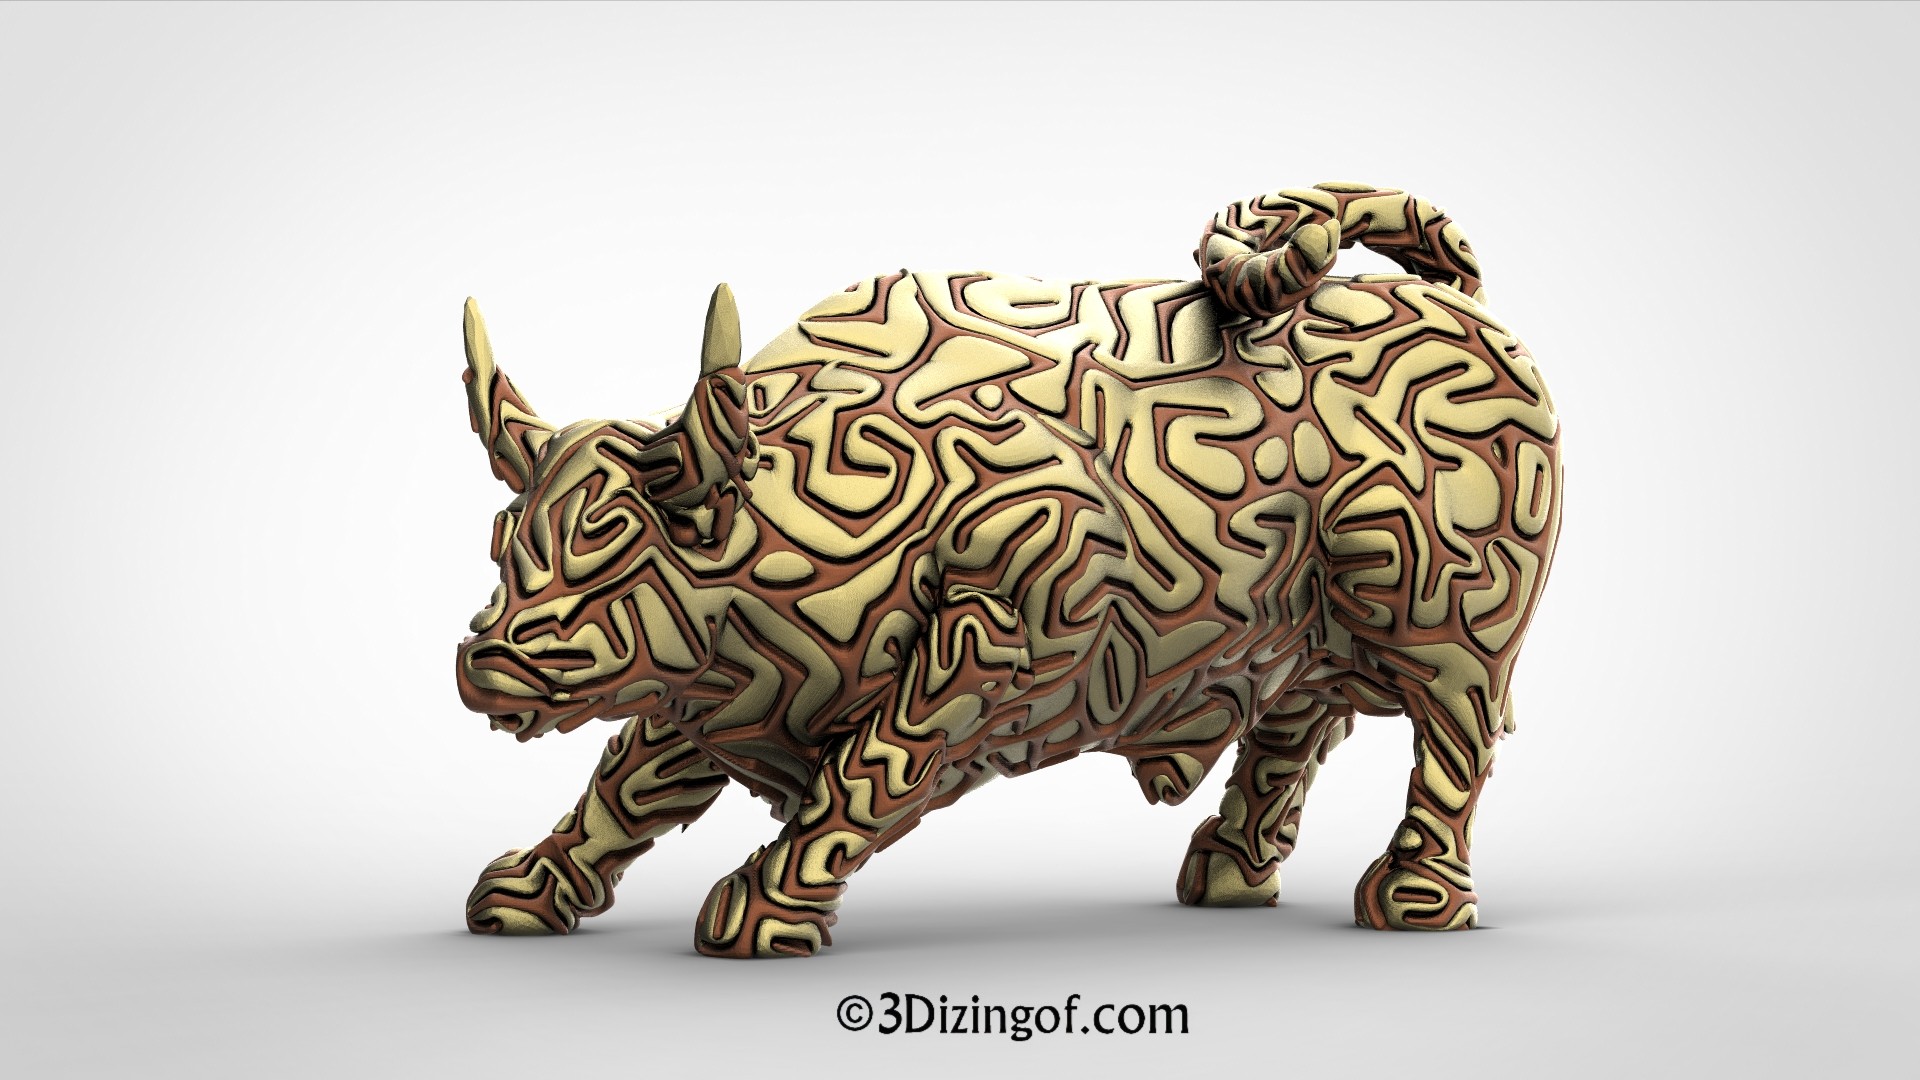 Home - 2 Colors Wall Street Bull , HD Wallpaper & Backgrounds